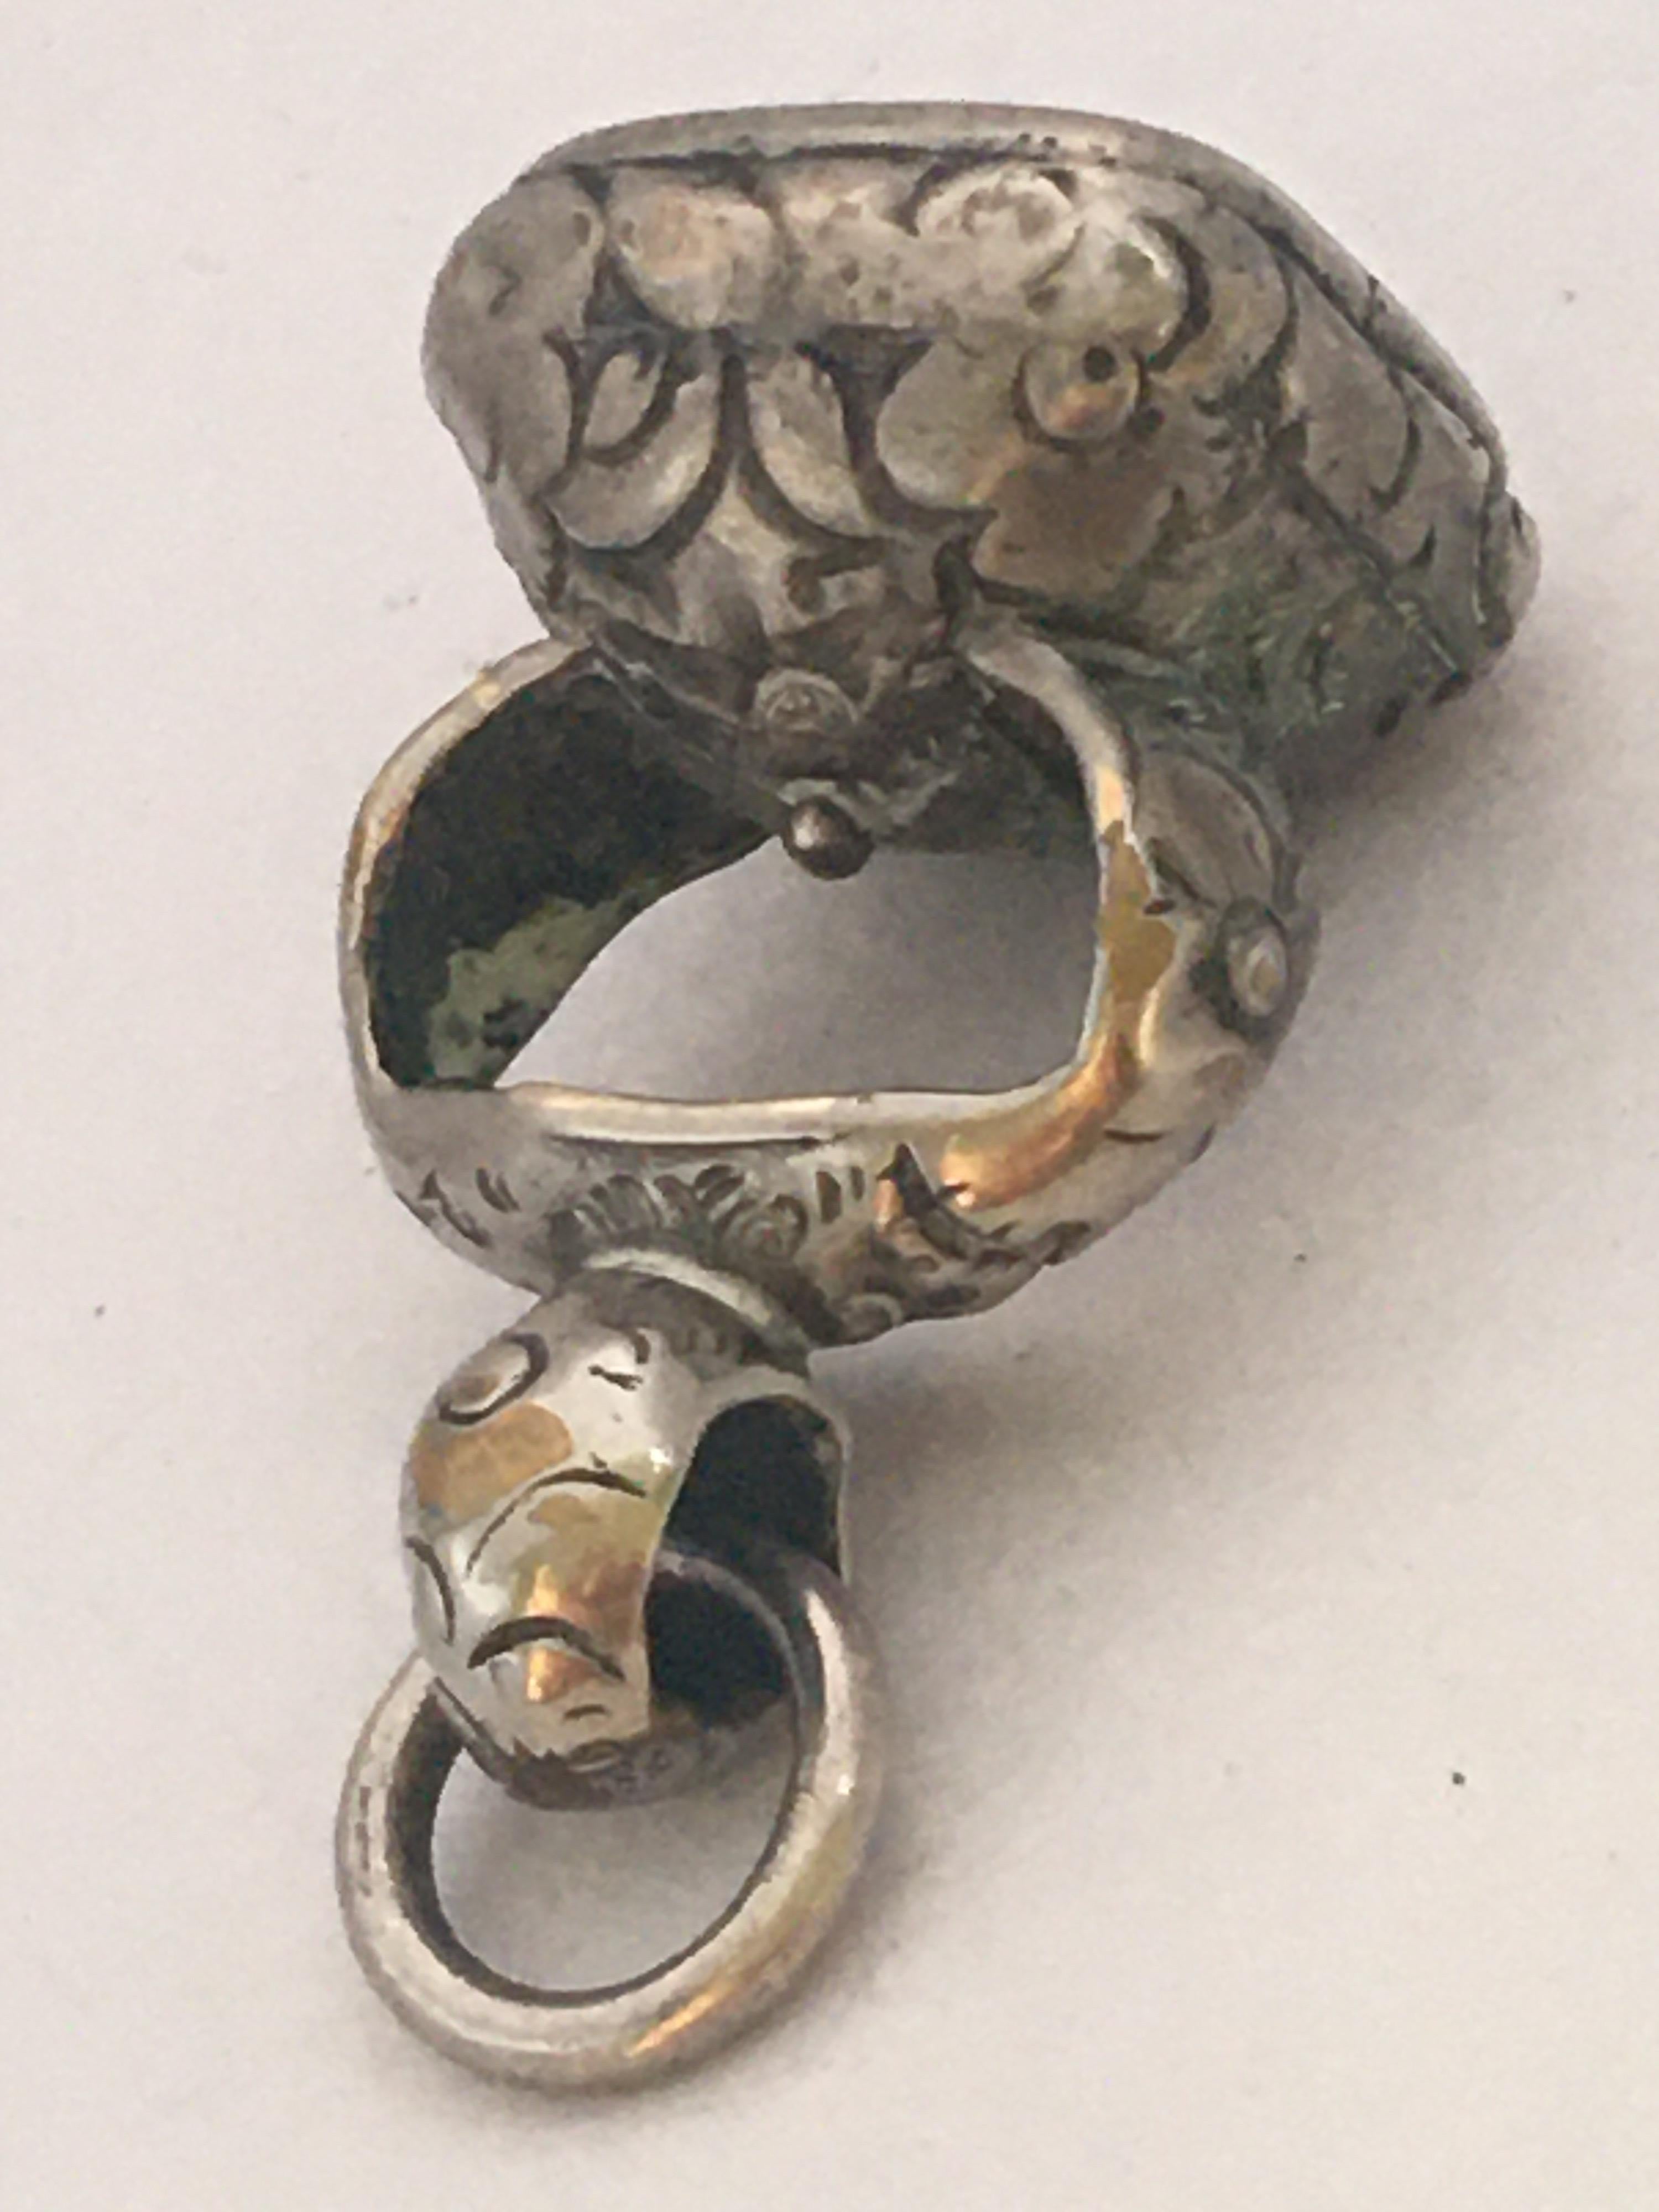 This beautiful antique fob seal pendant is in in good shape for its age. Some tarnishes on the metal gilt as shown. Please study the images carefully as form part of the description. It is measured at 32mm high(36mm including metal ring), 20mm